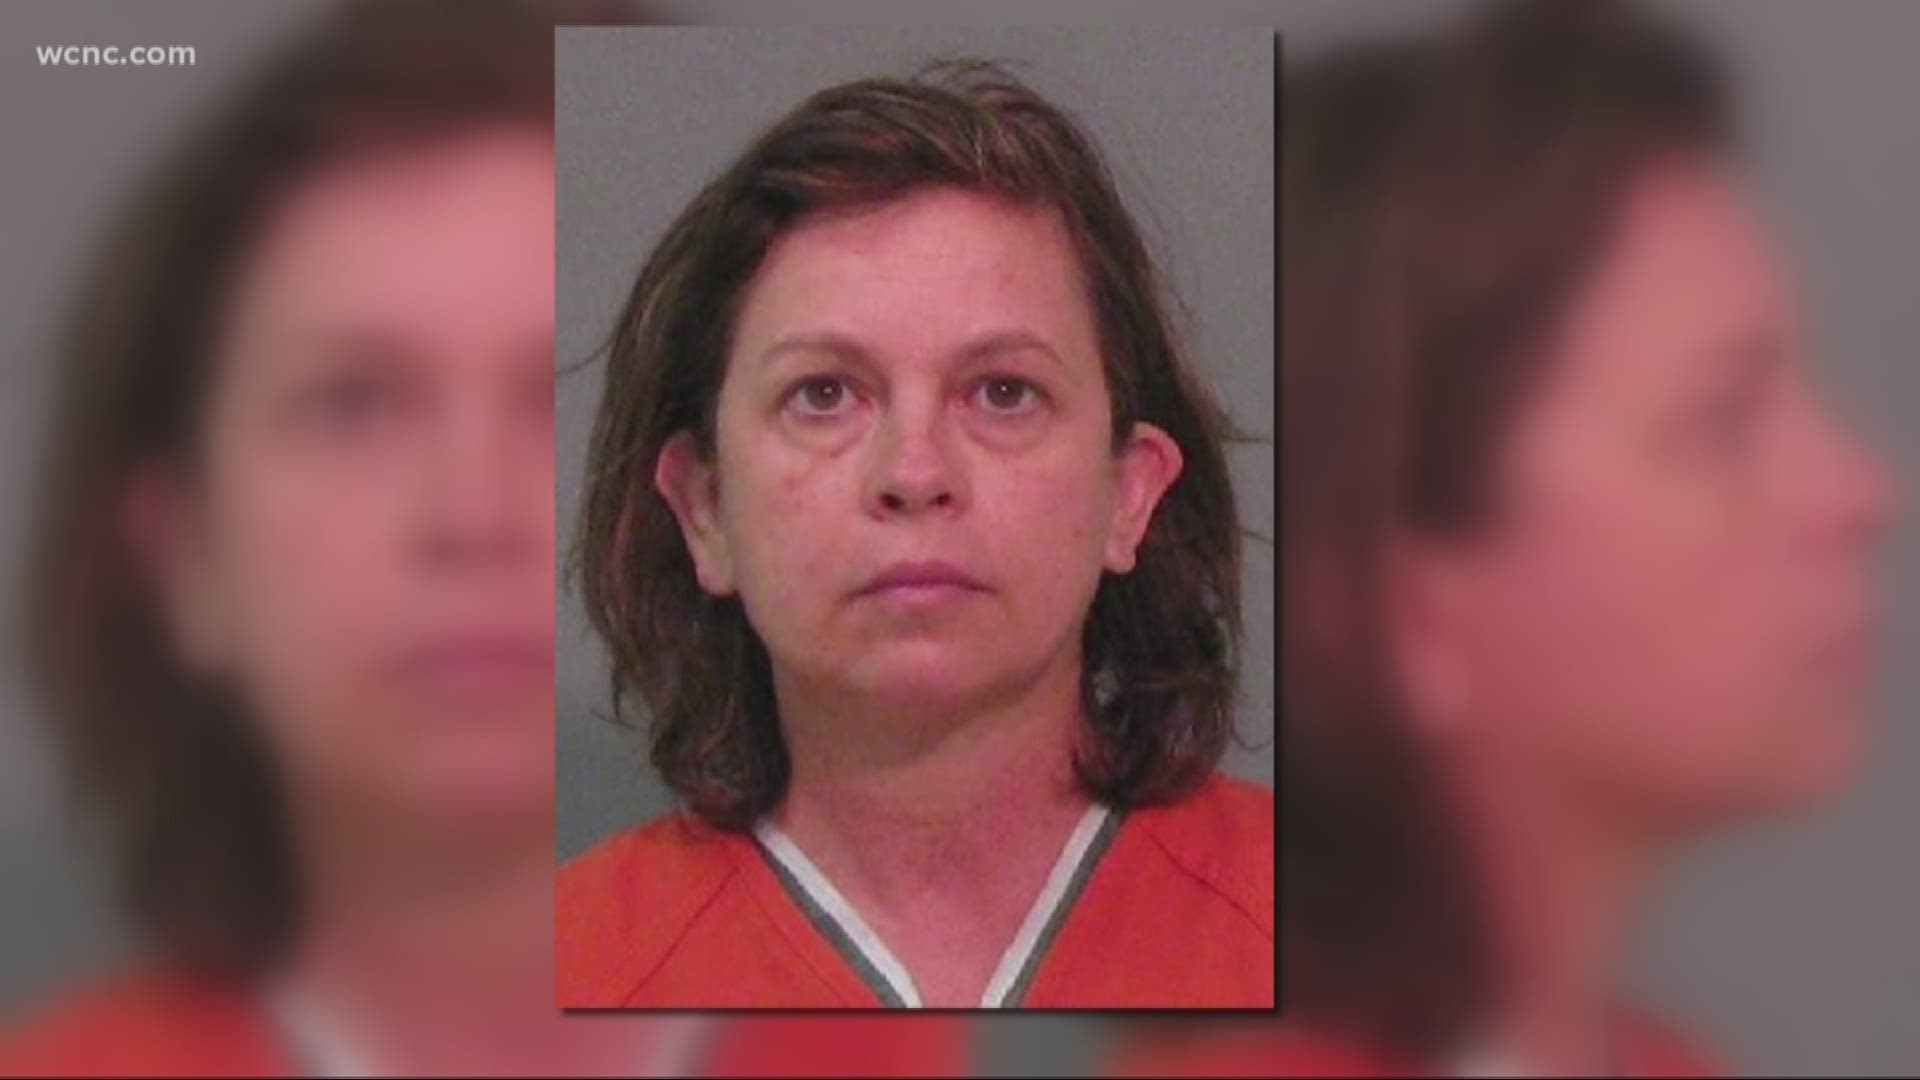 A South Carolina woman is accused of killing her husband by poisoning him with the active ingredient in eye drops.